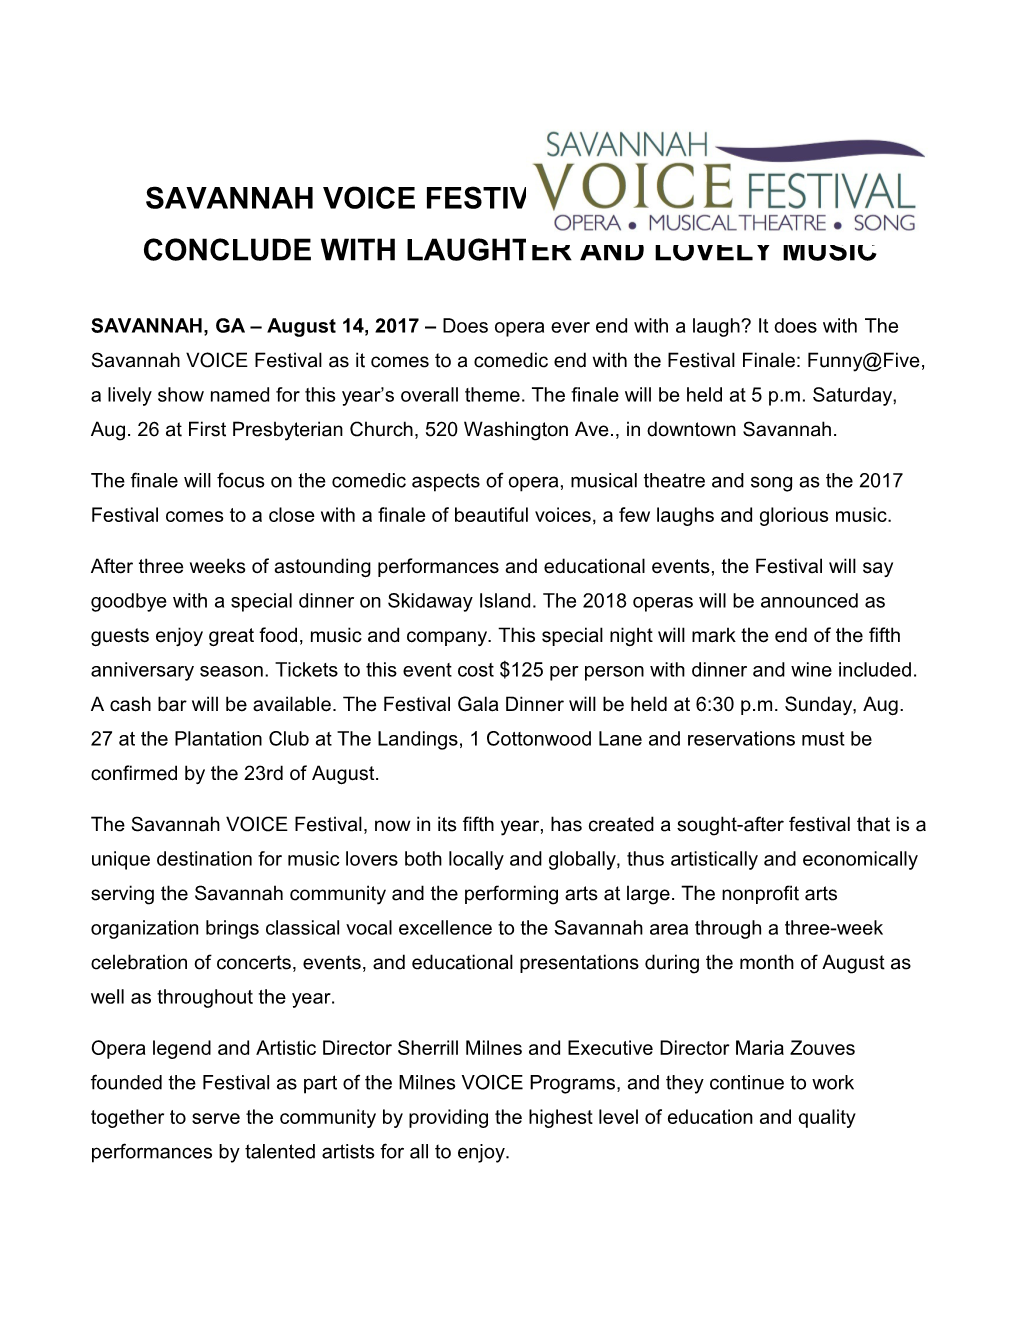 Savannah Voice Festival S Fifth Seasonto Conclude with Laughter and Lovely Music